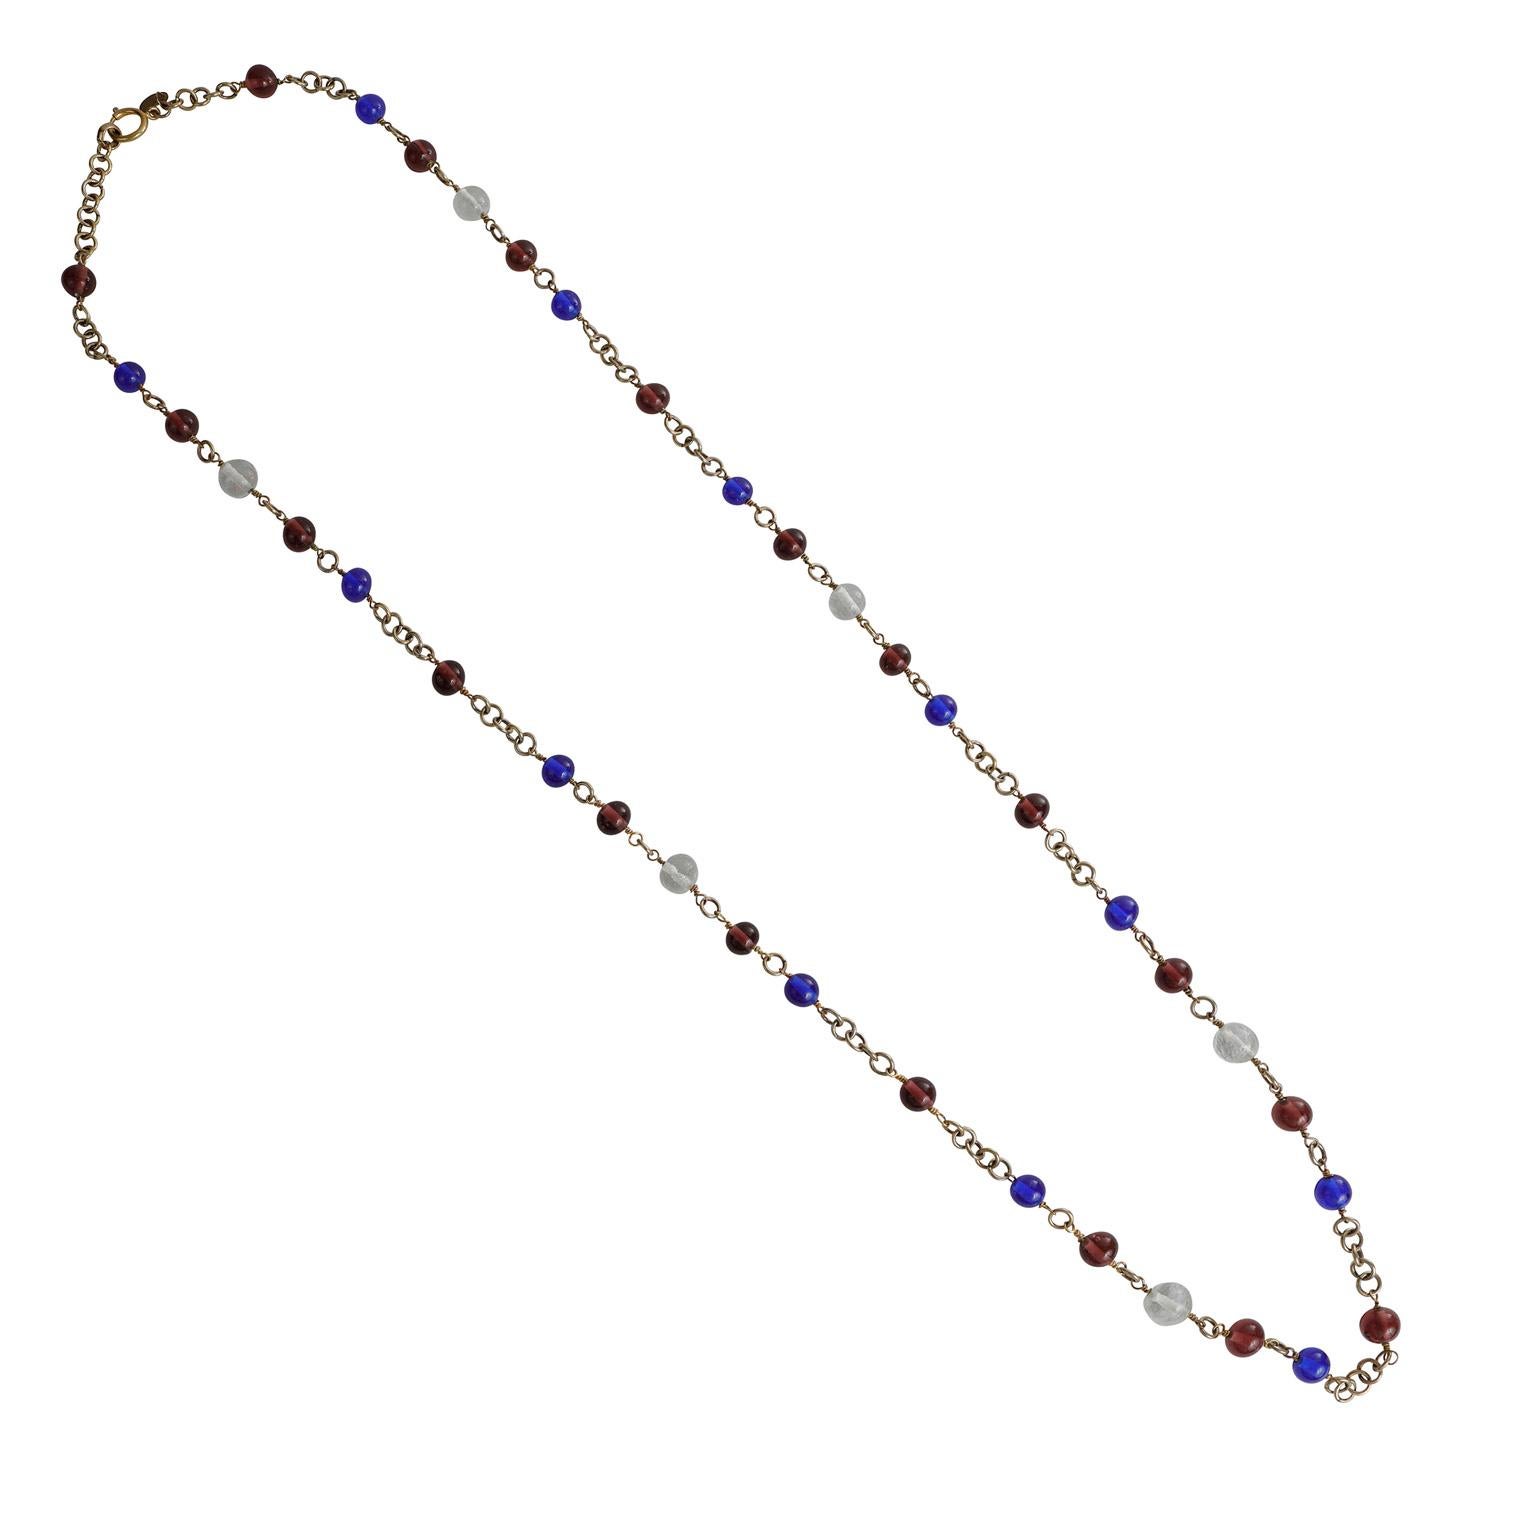 This authentic Chanel Purple and Blue Gripoix Beaded Necklace is in excellent vintage condition from the 1980’s.  Cobalt blue, purple and clear Gripoix glass beads are situated throughout a long gold tone chain with adjustable length.     Pouch or